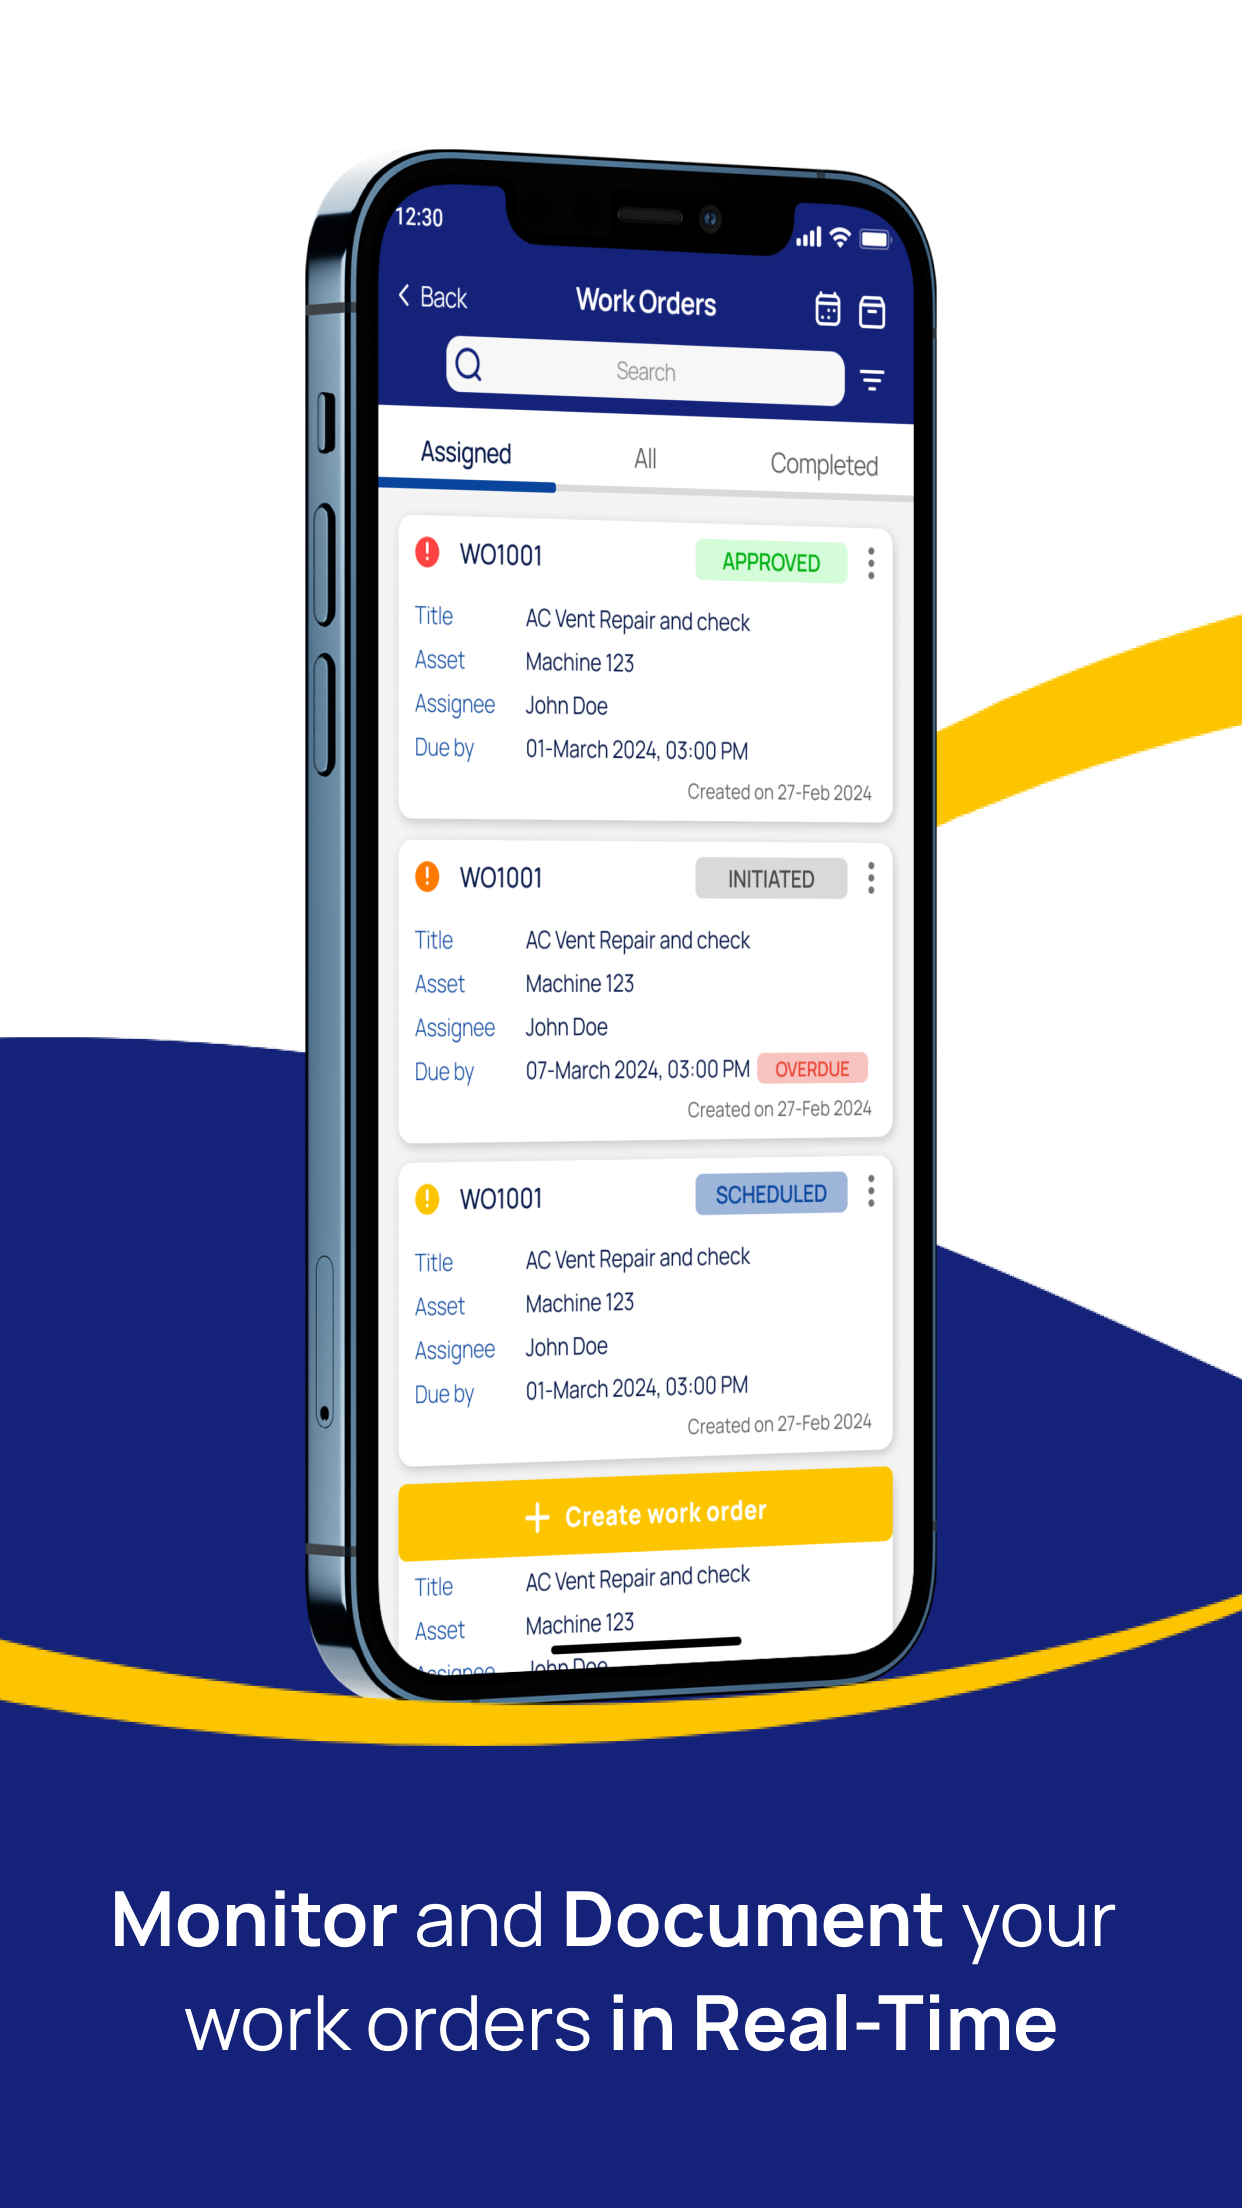 All-in-one mobile Create, assess, prioritize, and measure all work orders from faults, service schedules and assign work to your mechanics with detailed cost of service.